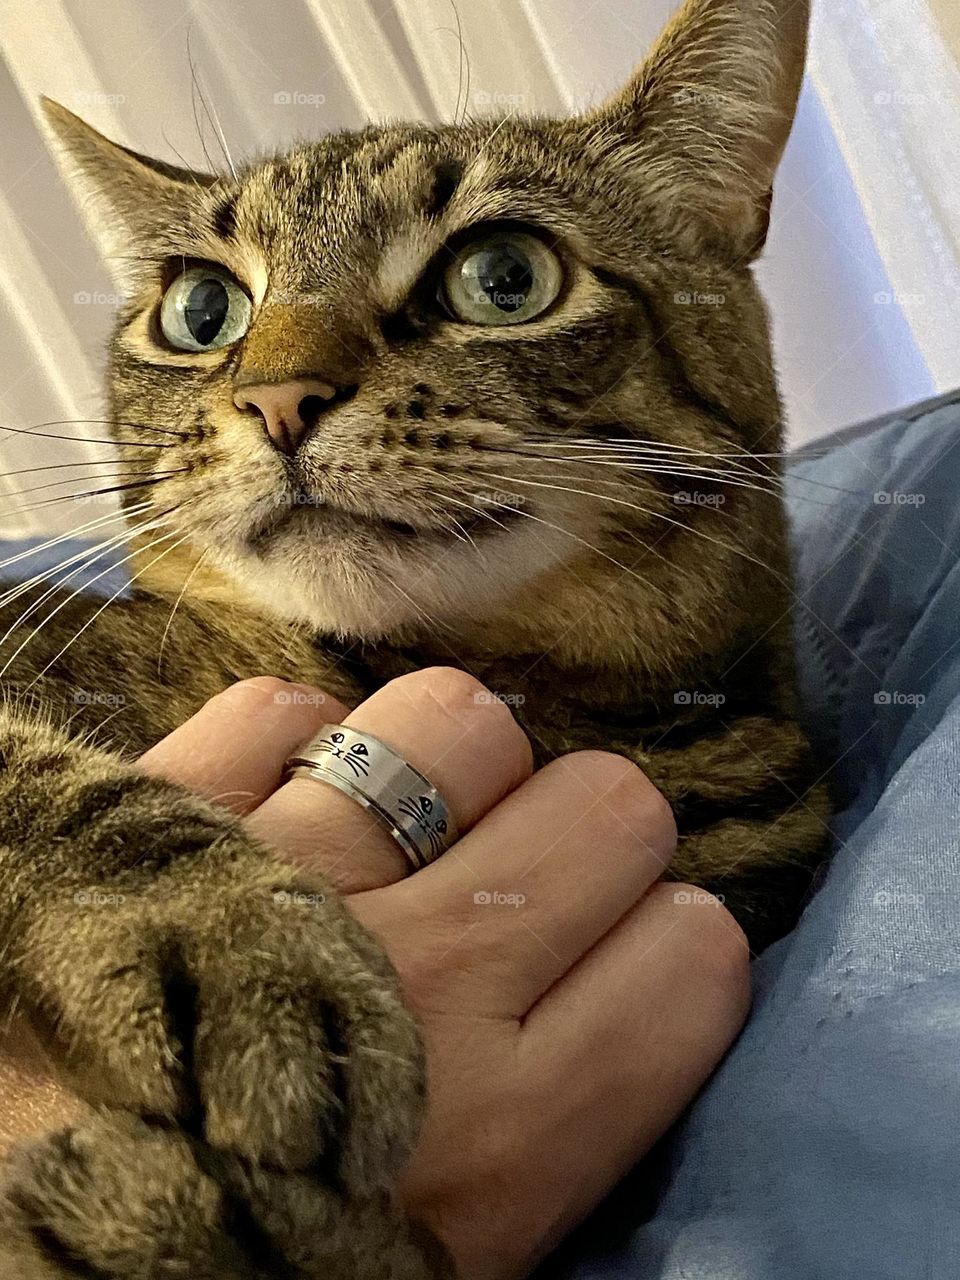 A cat and a hand wearing a spinner ring